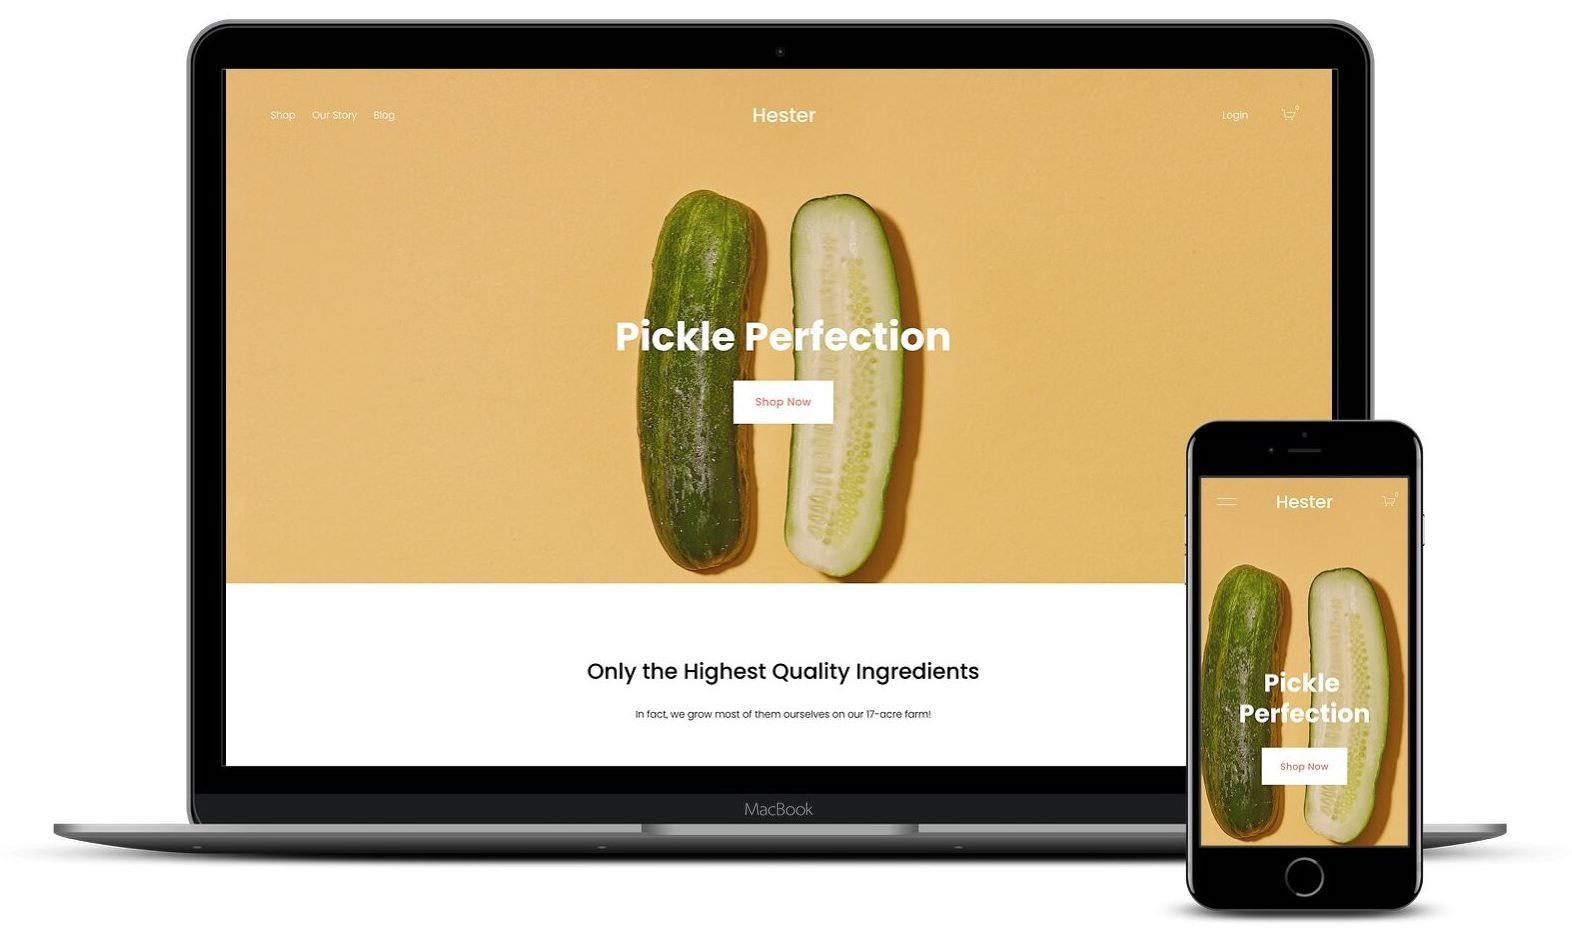 Hester is one of the best Squarespace templates for eCommerce